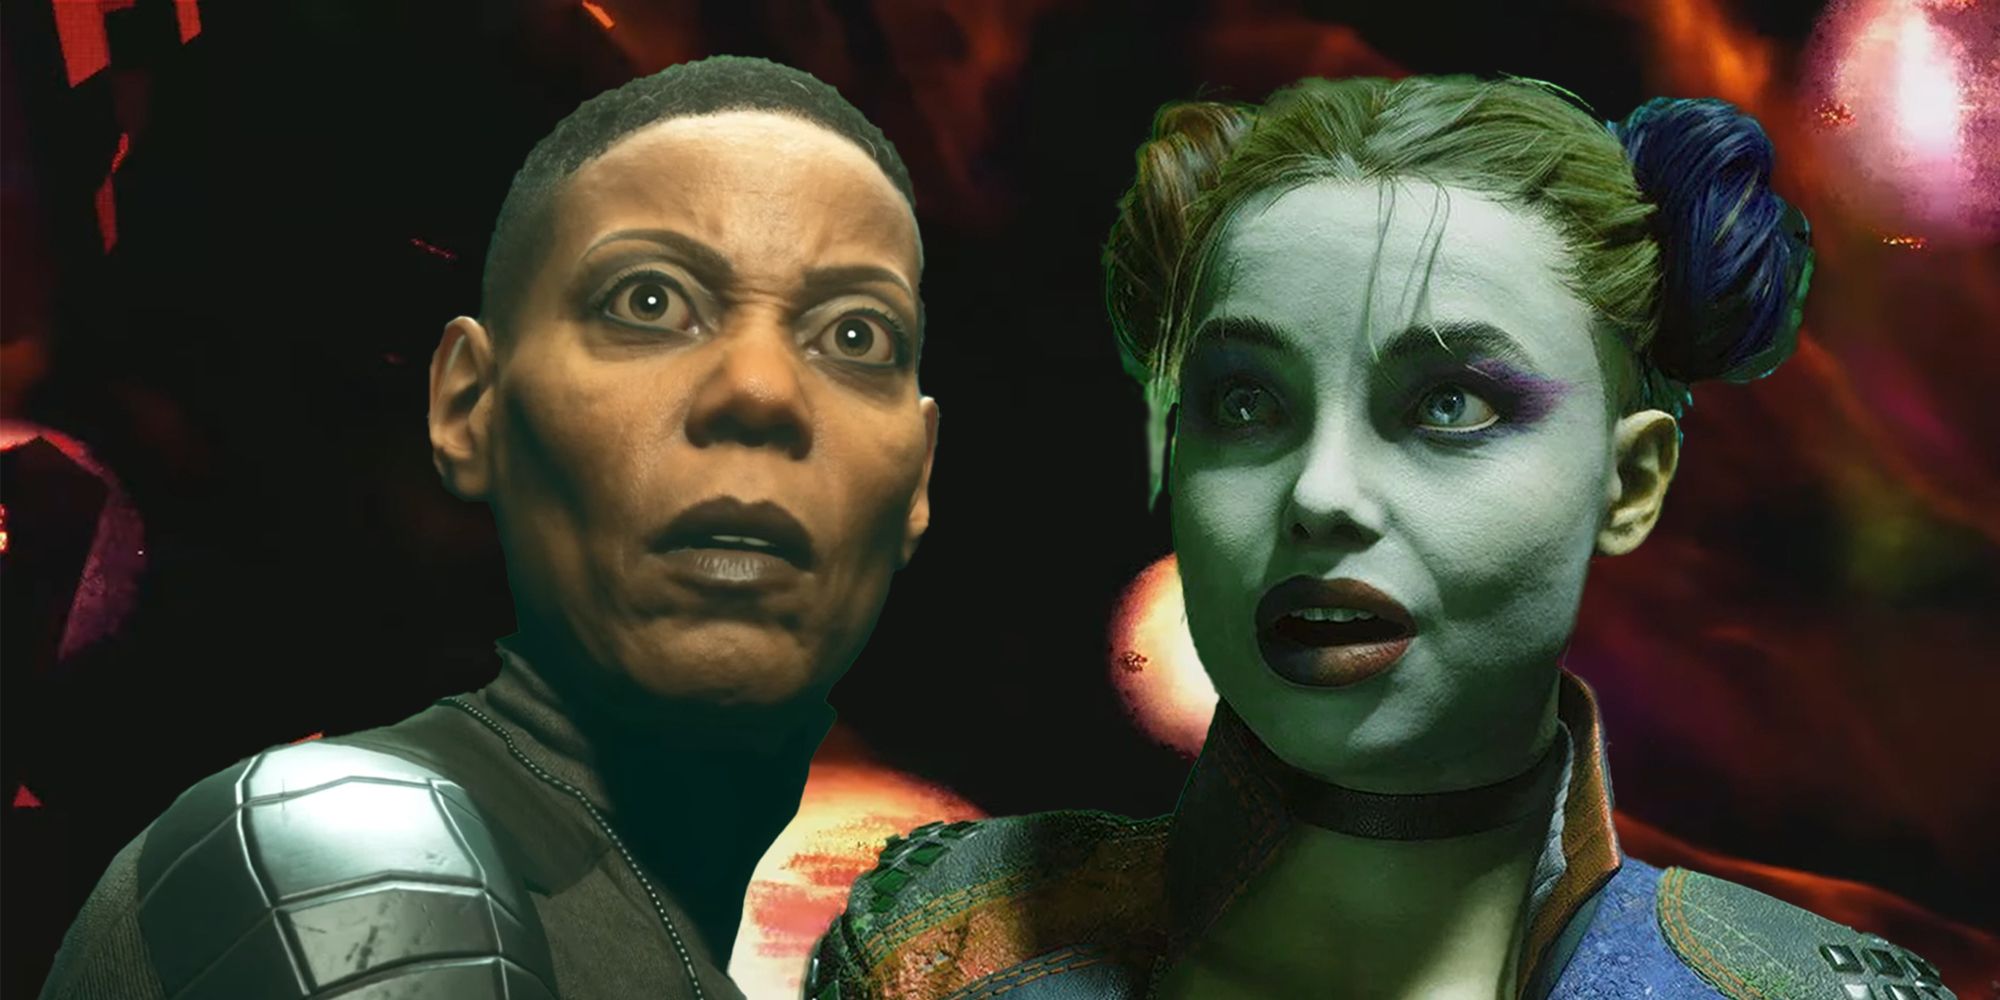 Amanda Waller and Harley Quinn looking surprised with the multiverse behind them